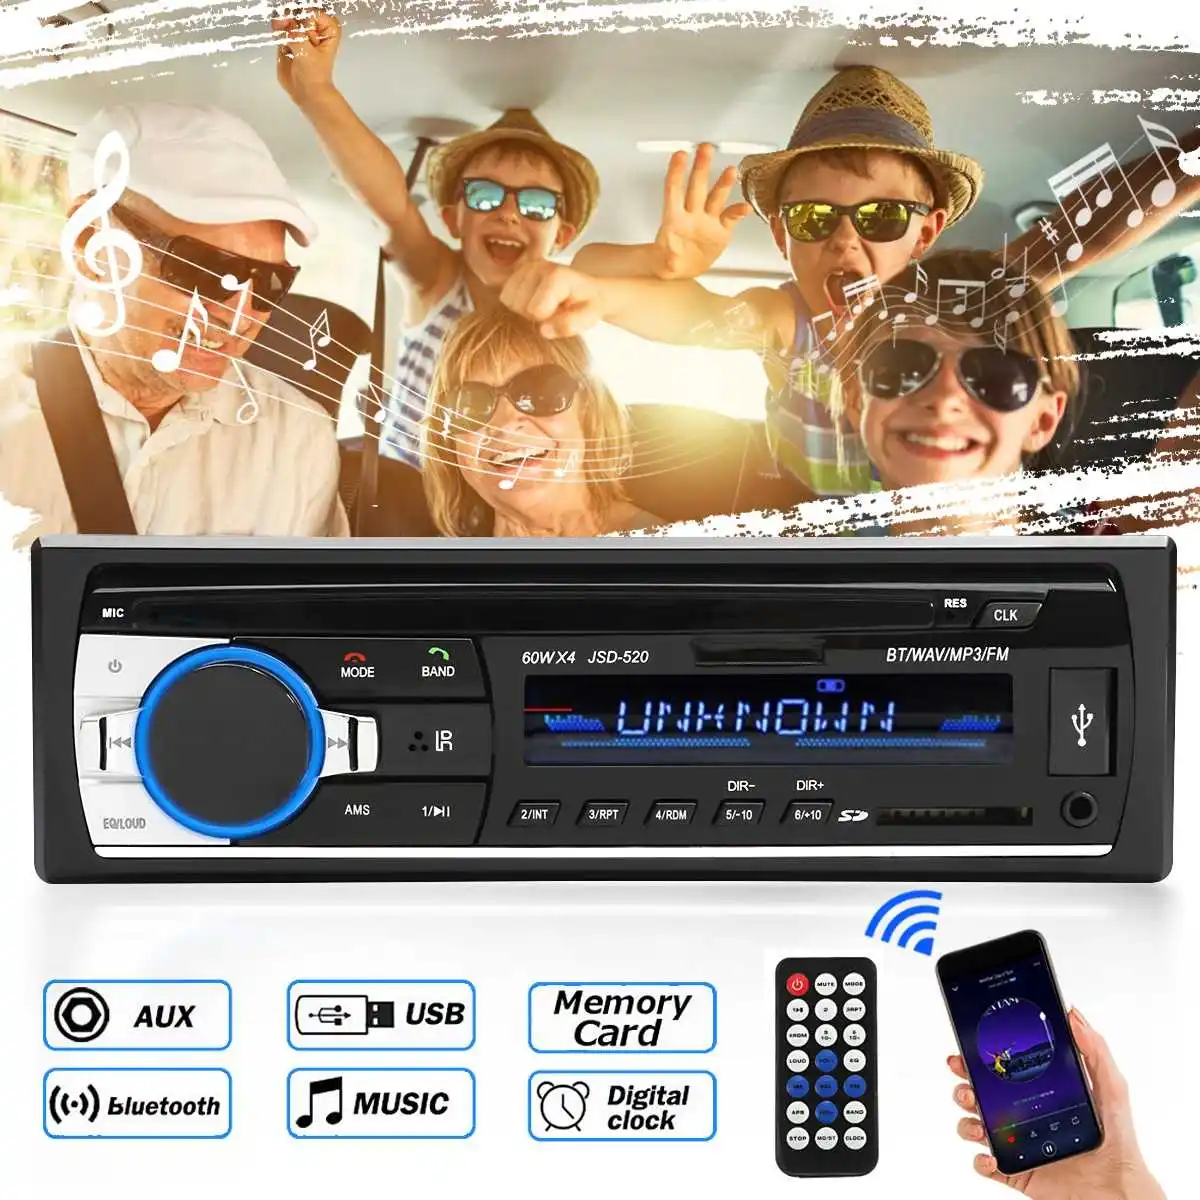 

24v Car Stereo Audio bluetooth 1 din Car MP3 Multimedia Player USB MP3 FM Radio Player JSD-520 with Remote Control